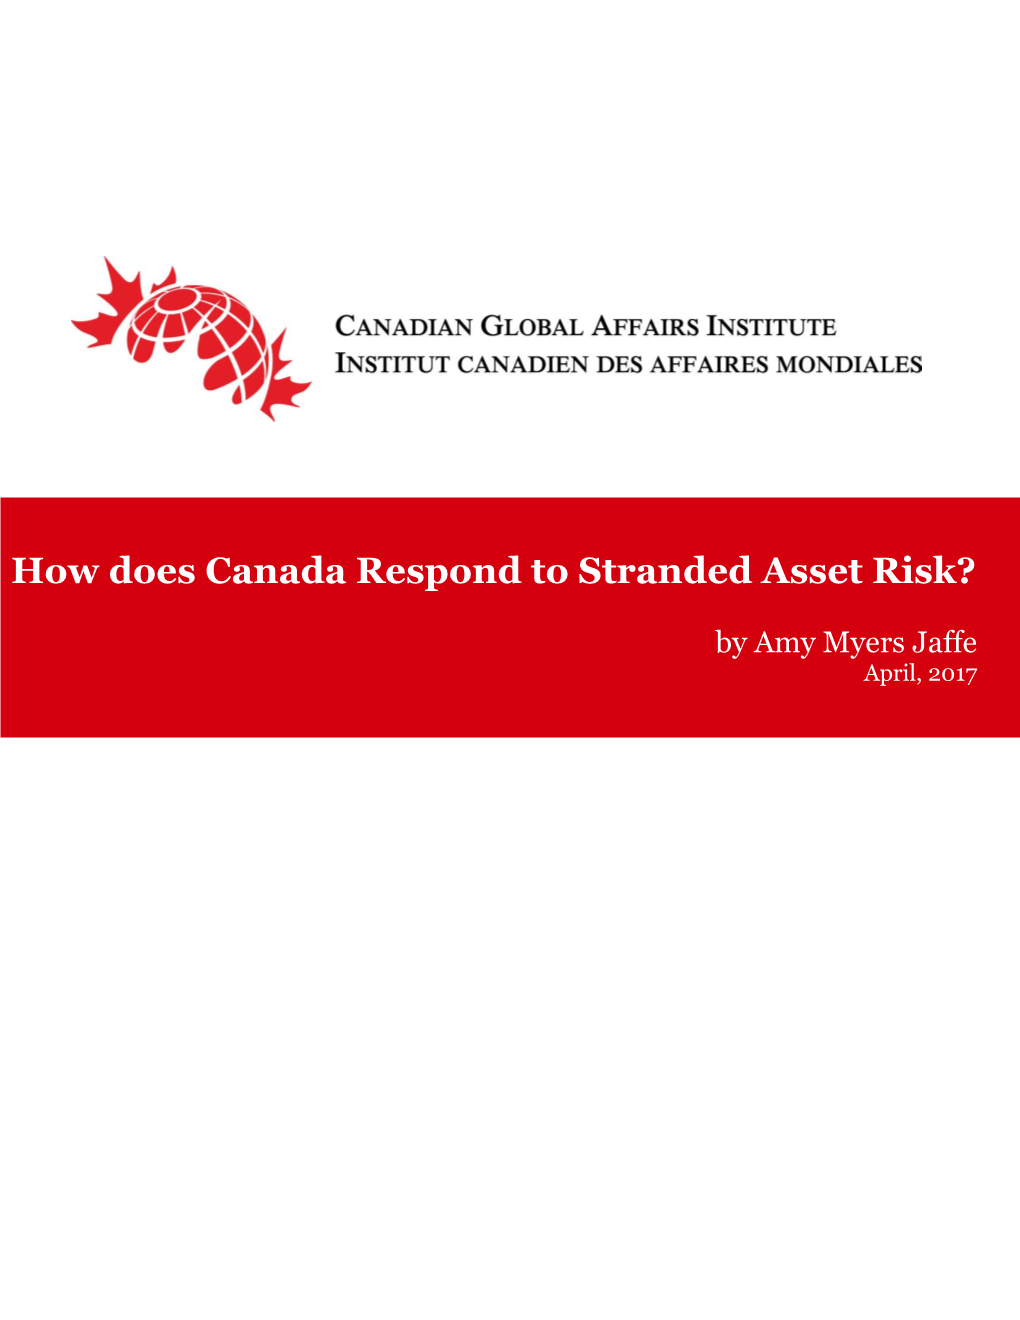 How Does Canada Respond to Stranded Asset Risk?